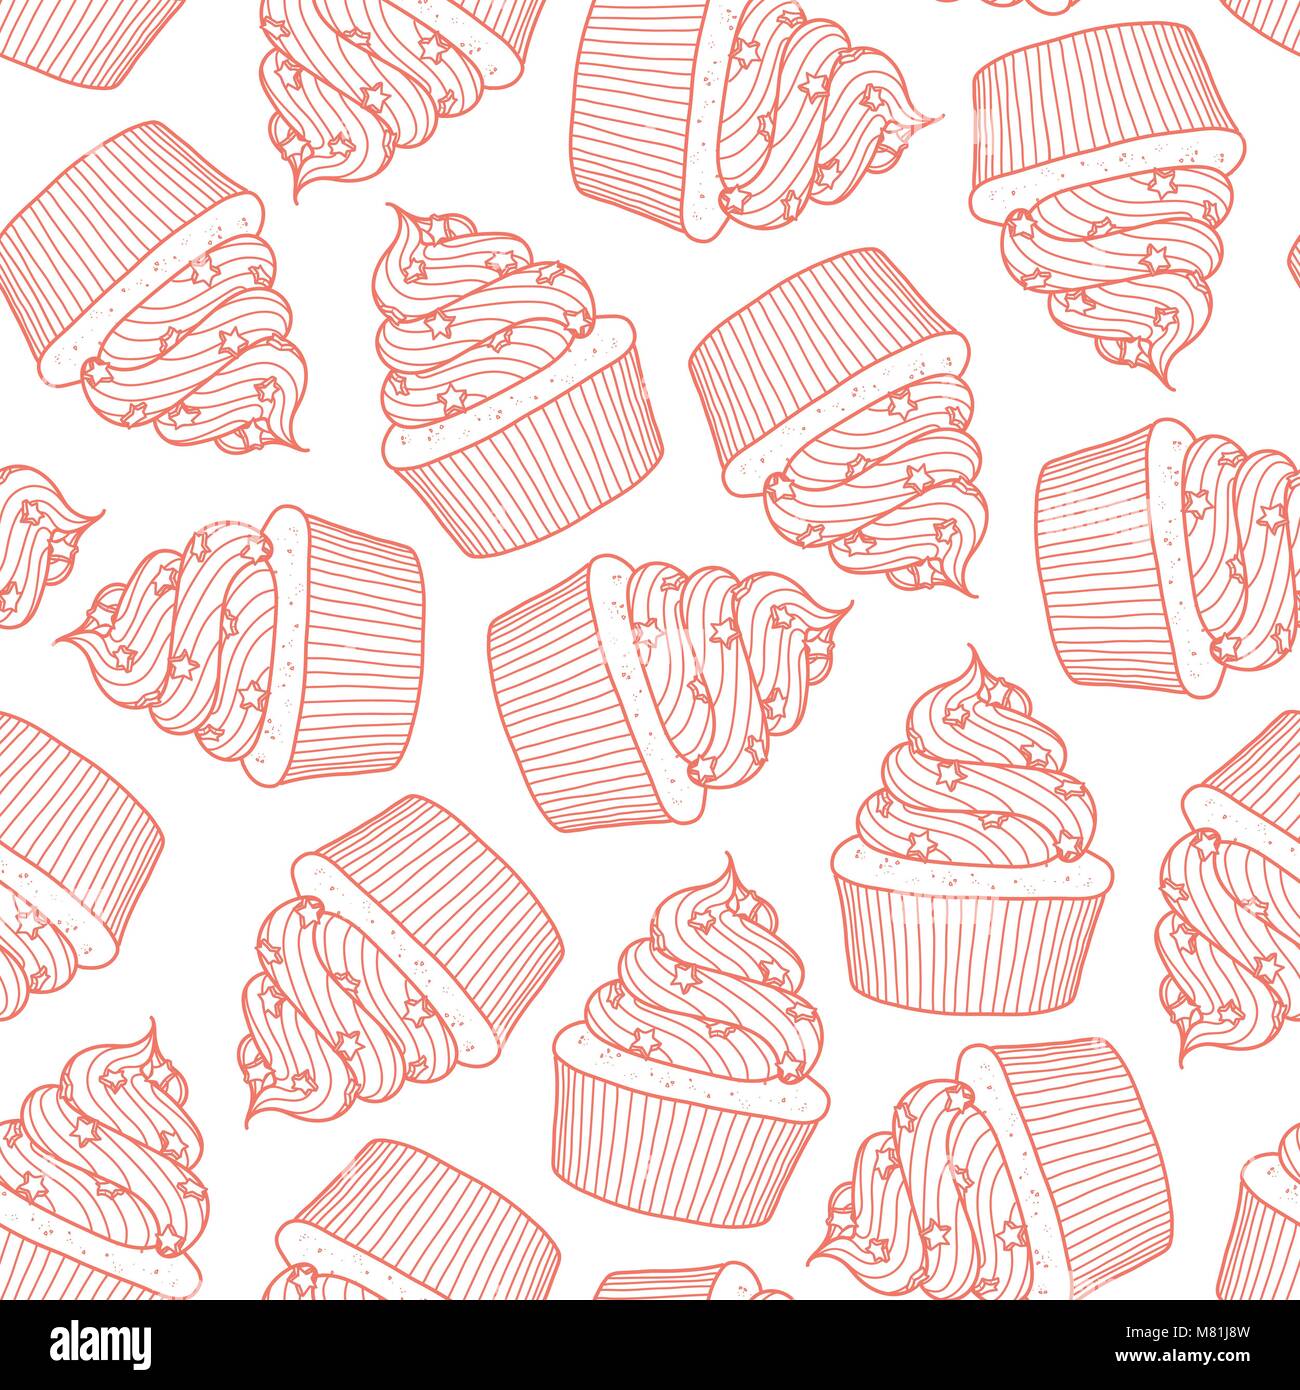 Cupcakes random on white background. Cute hand drawn seamless pattern of dessert in red outline style. Stock Vector